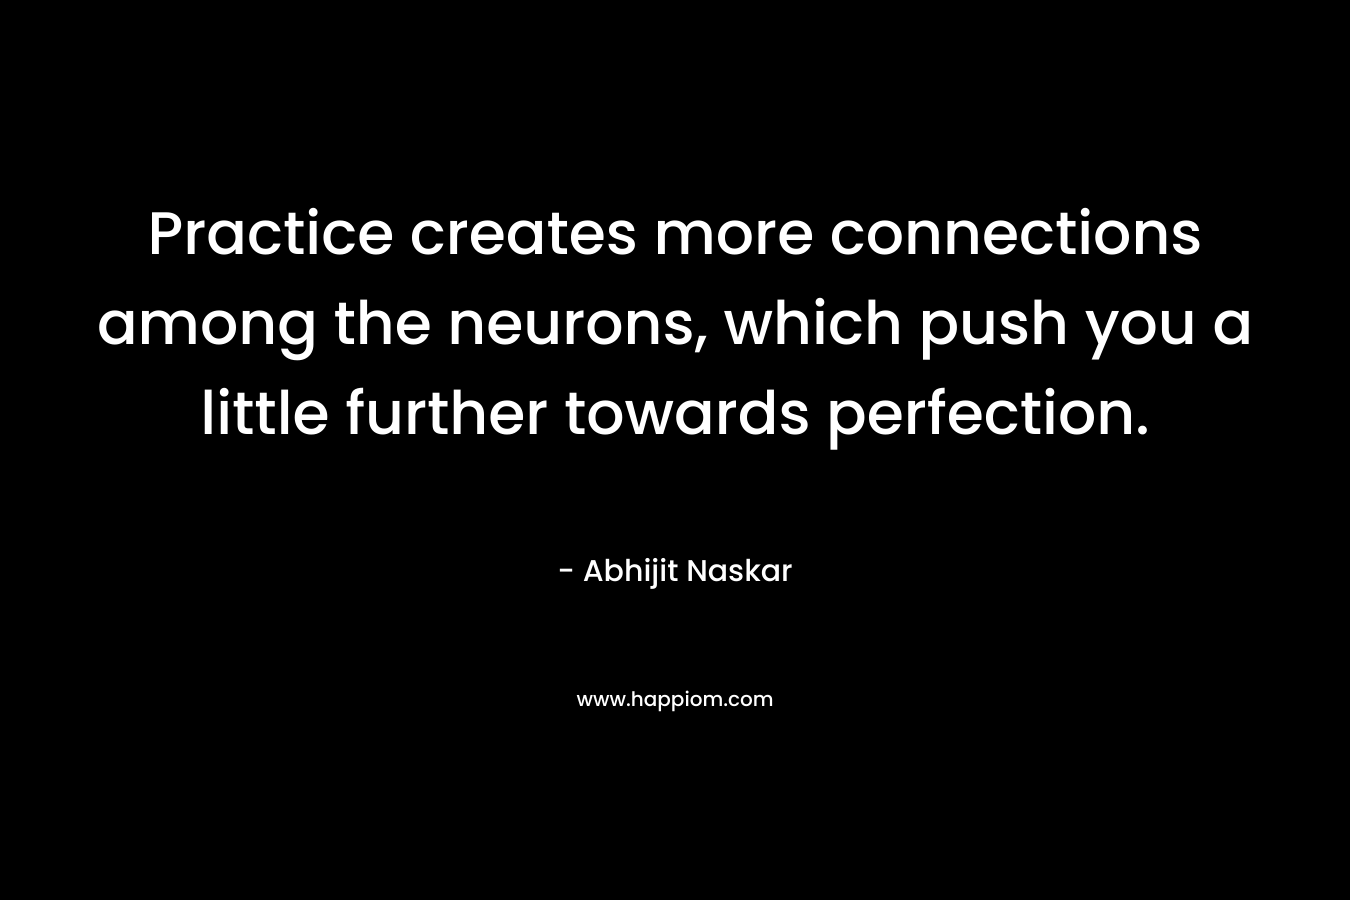 Practice creates more connections among the neurons, which push you a little further towards perfection.